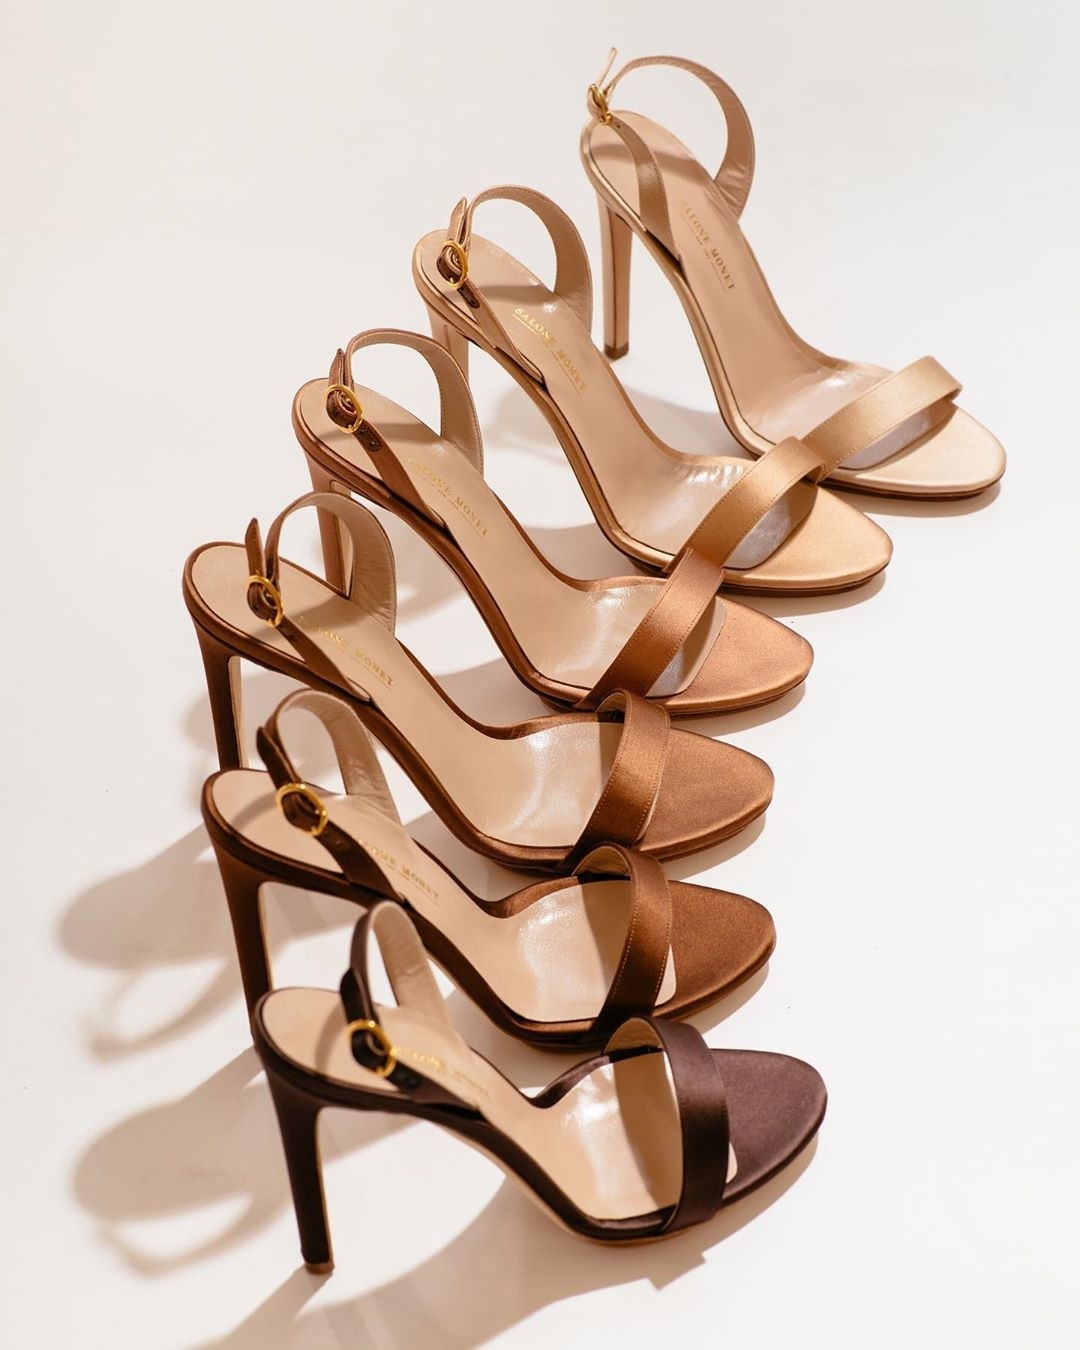 the strappy heels in different shades of nude 